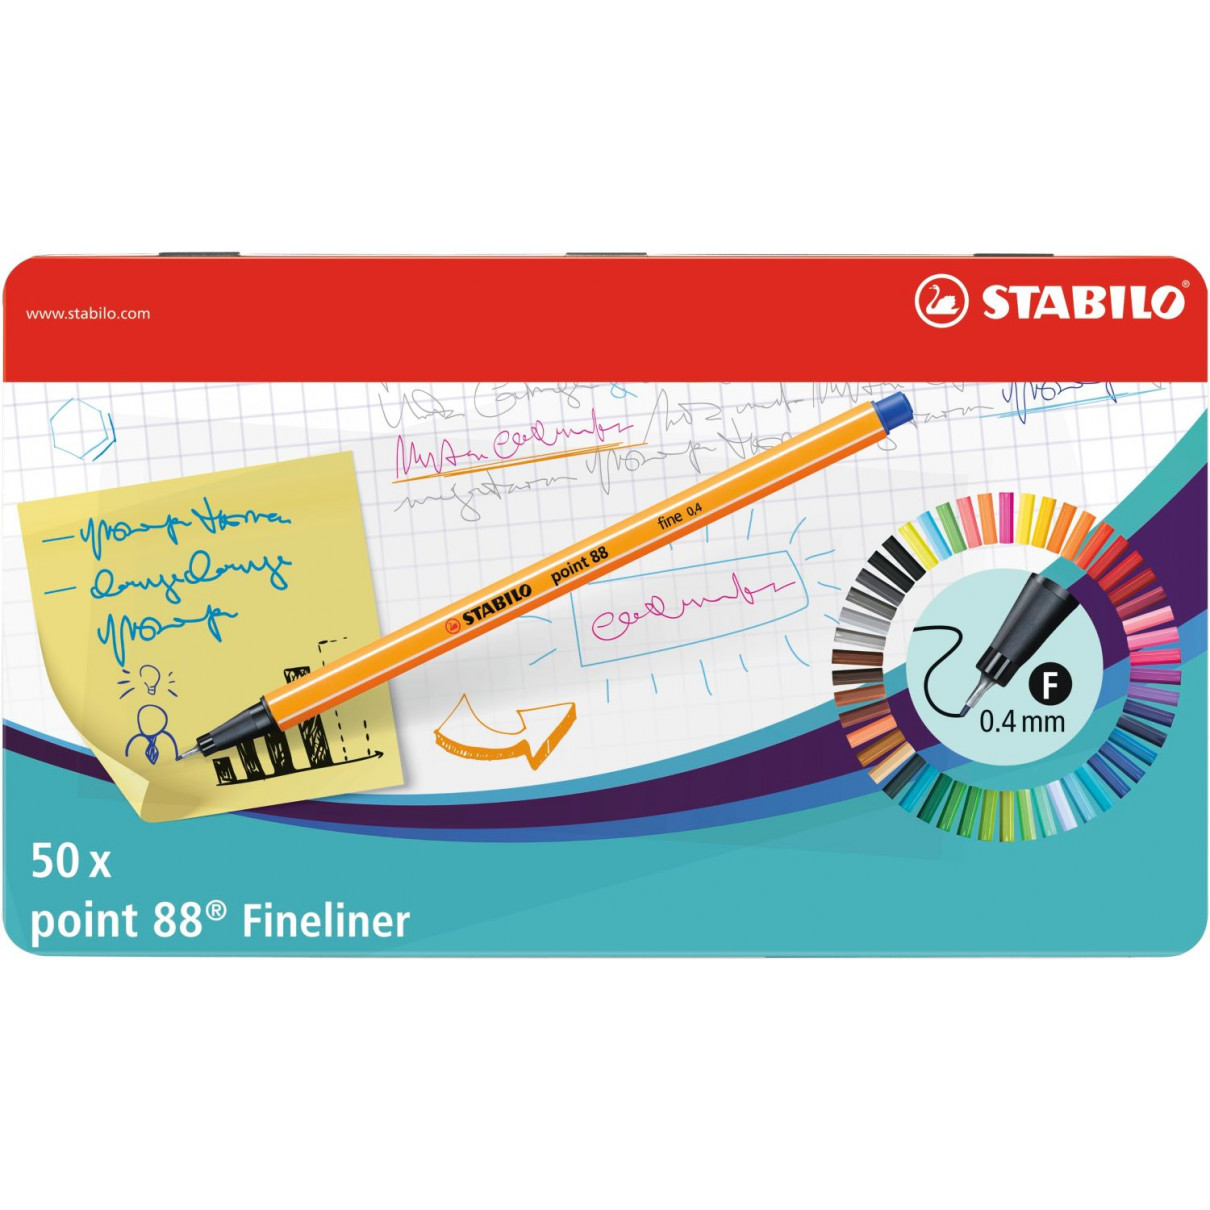 STABILO point 88 Fineliner - Tin of 50 - Assorted Colours, 8850-6